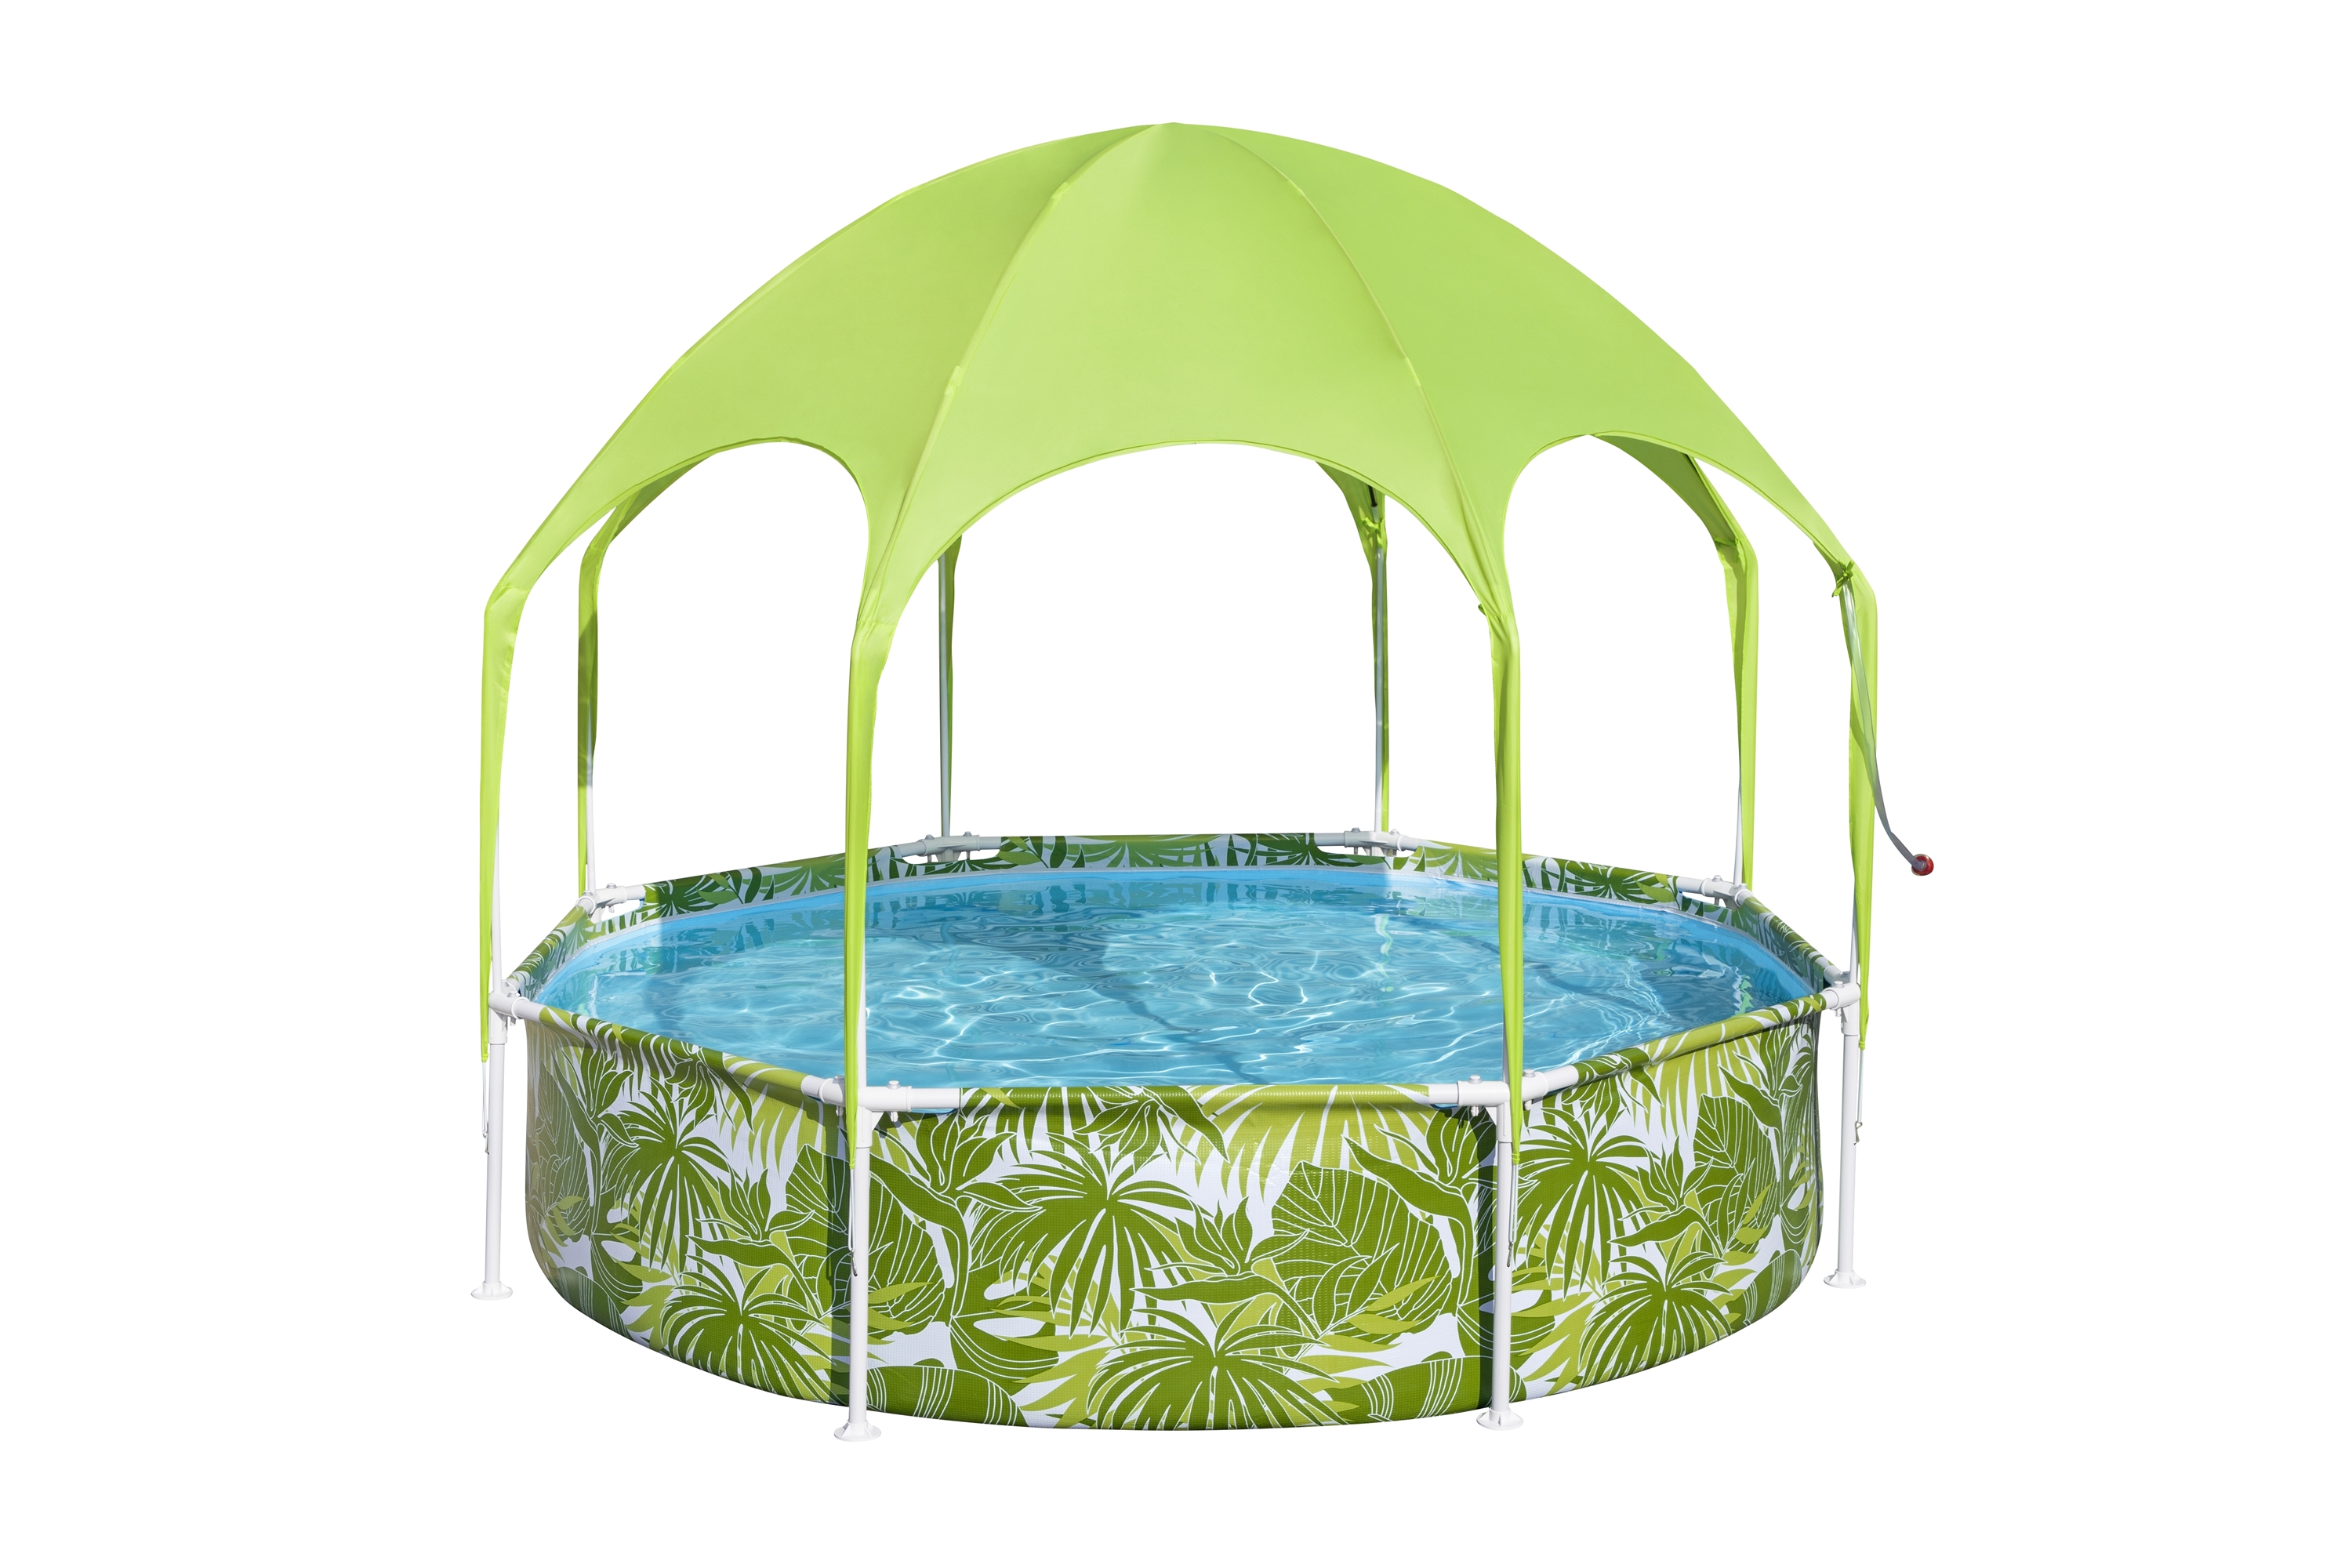 H2OGO 8 ft. x 20 in. Round Above Ground Pool Set With Pool Shade - image 1 of 8